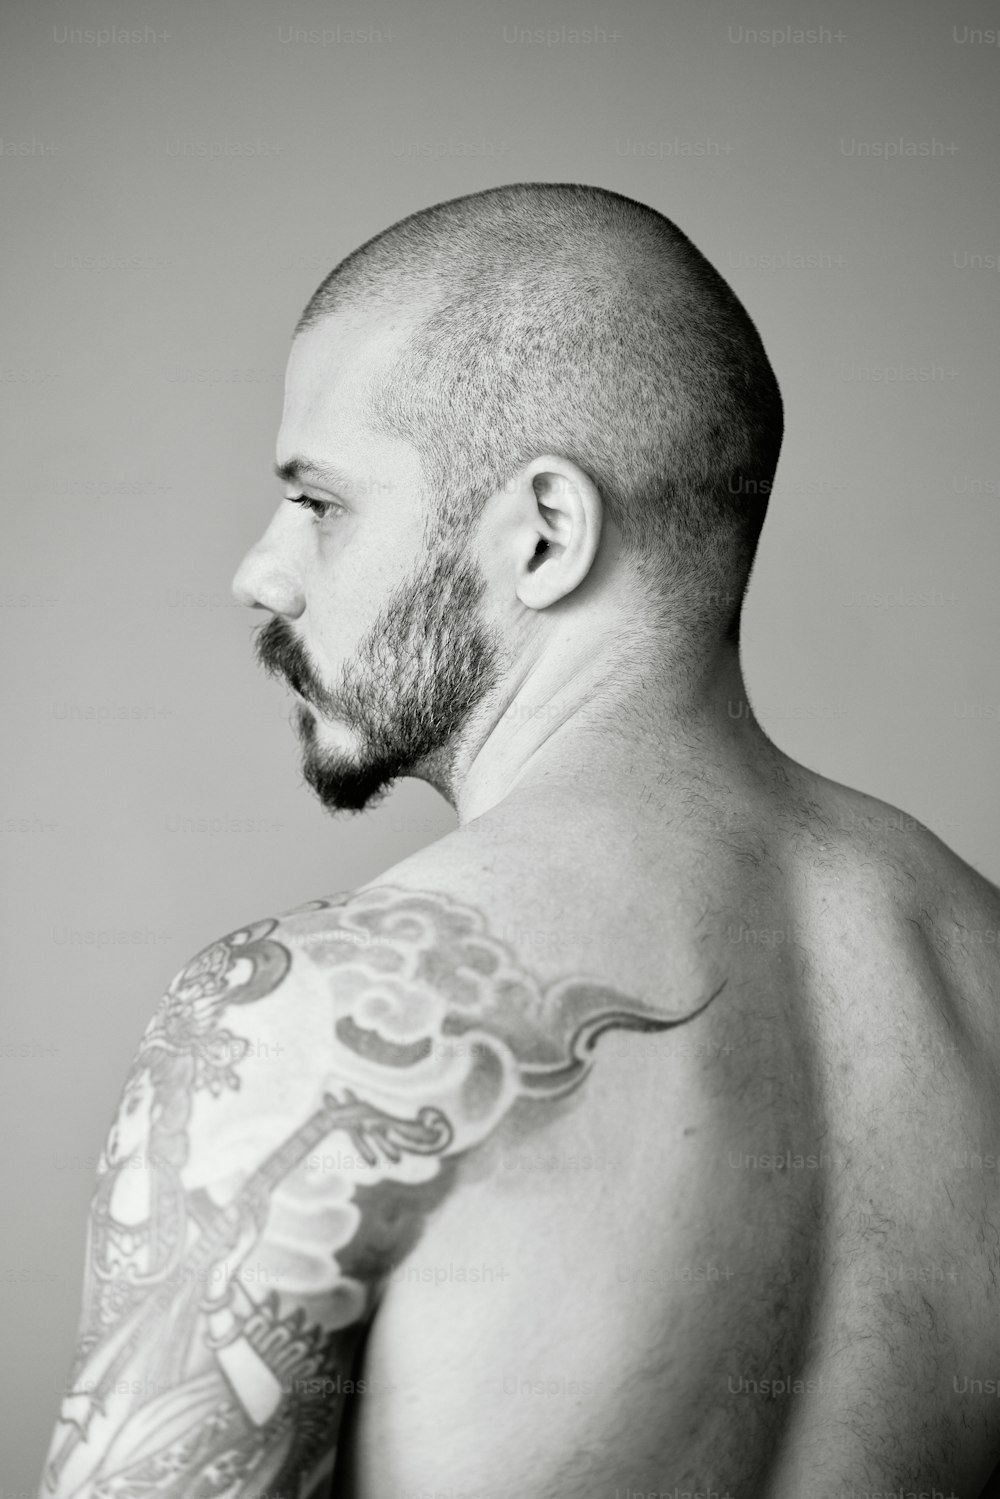 a man with a beard and tattoos on his chest